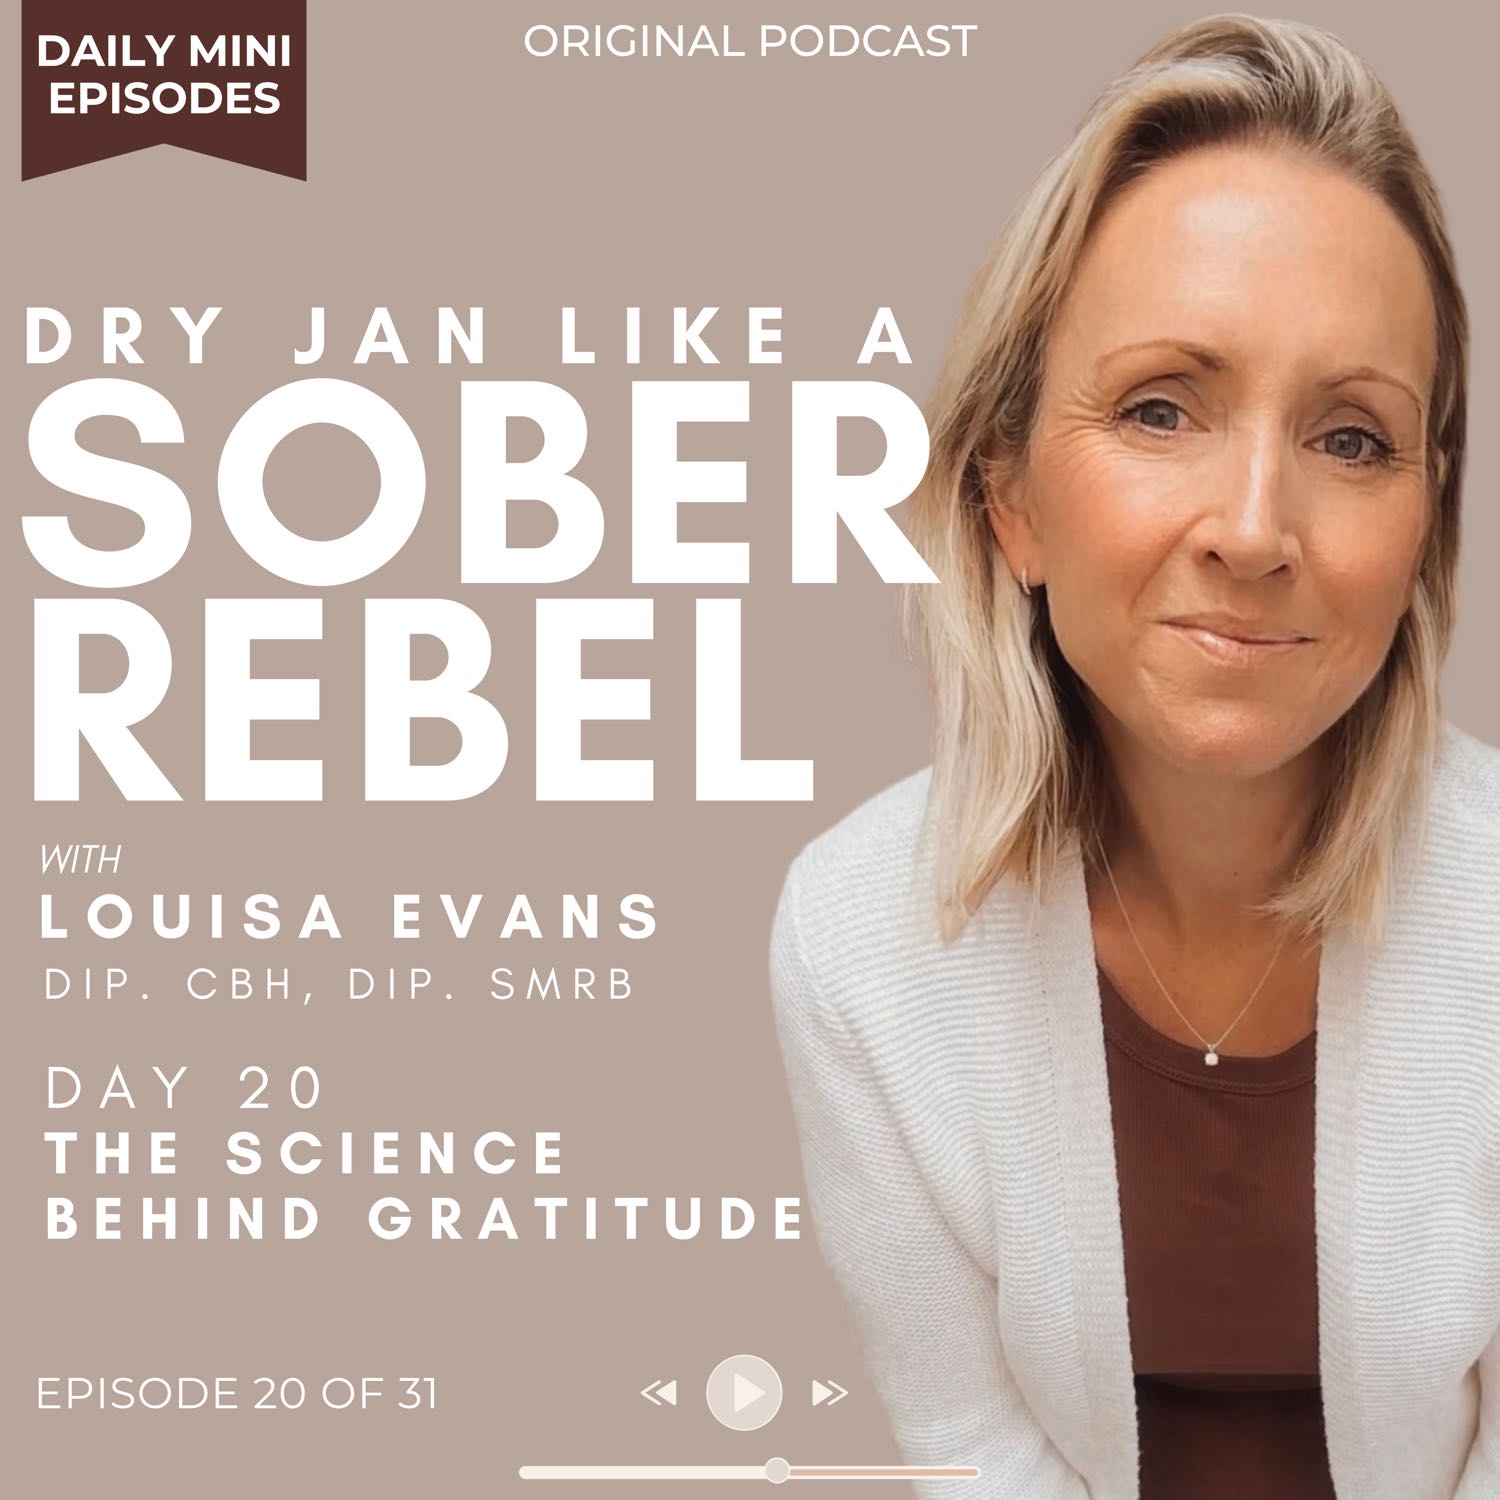 Dry Jan like a Sober Rebel | The science behind gratitude | Day 20